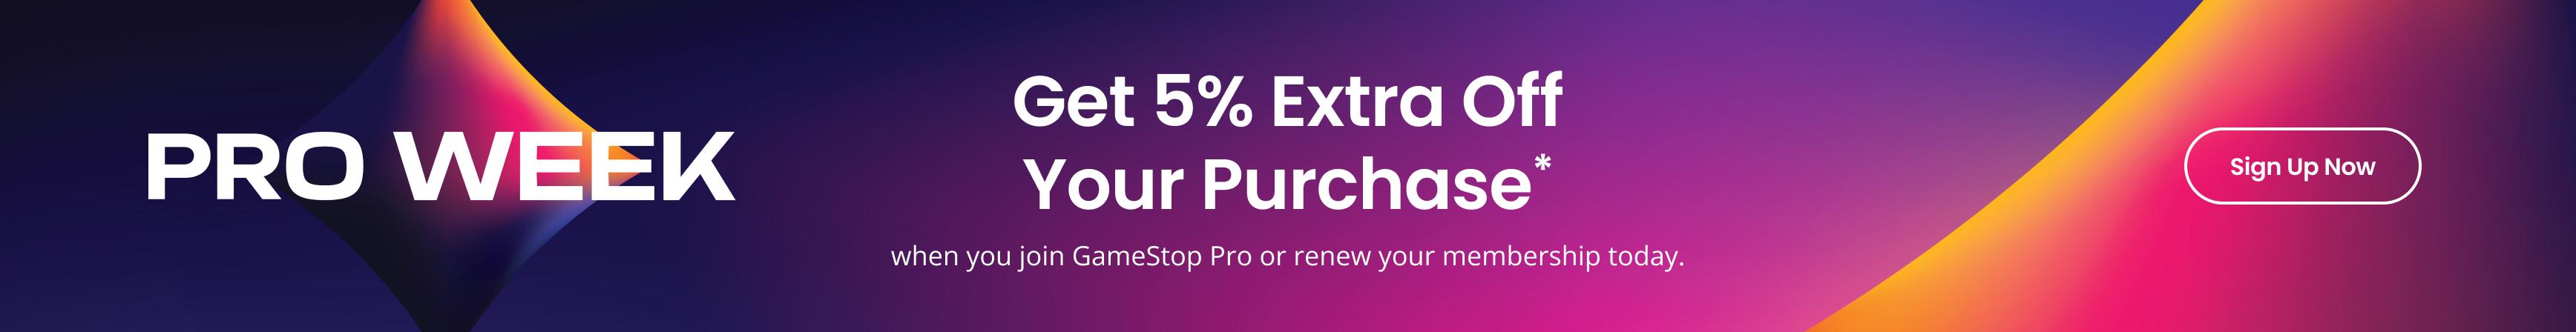 PRO WEEK New and Renewing Pros Get 5% Off Their Purchase